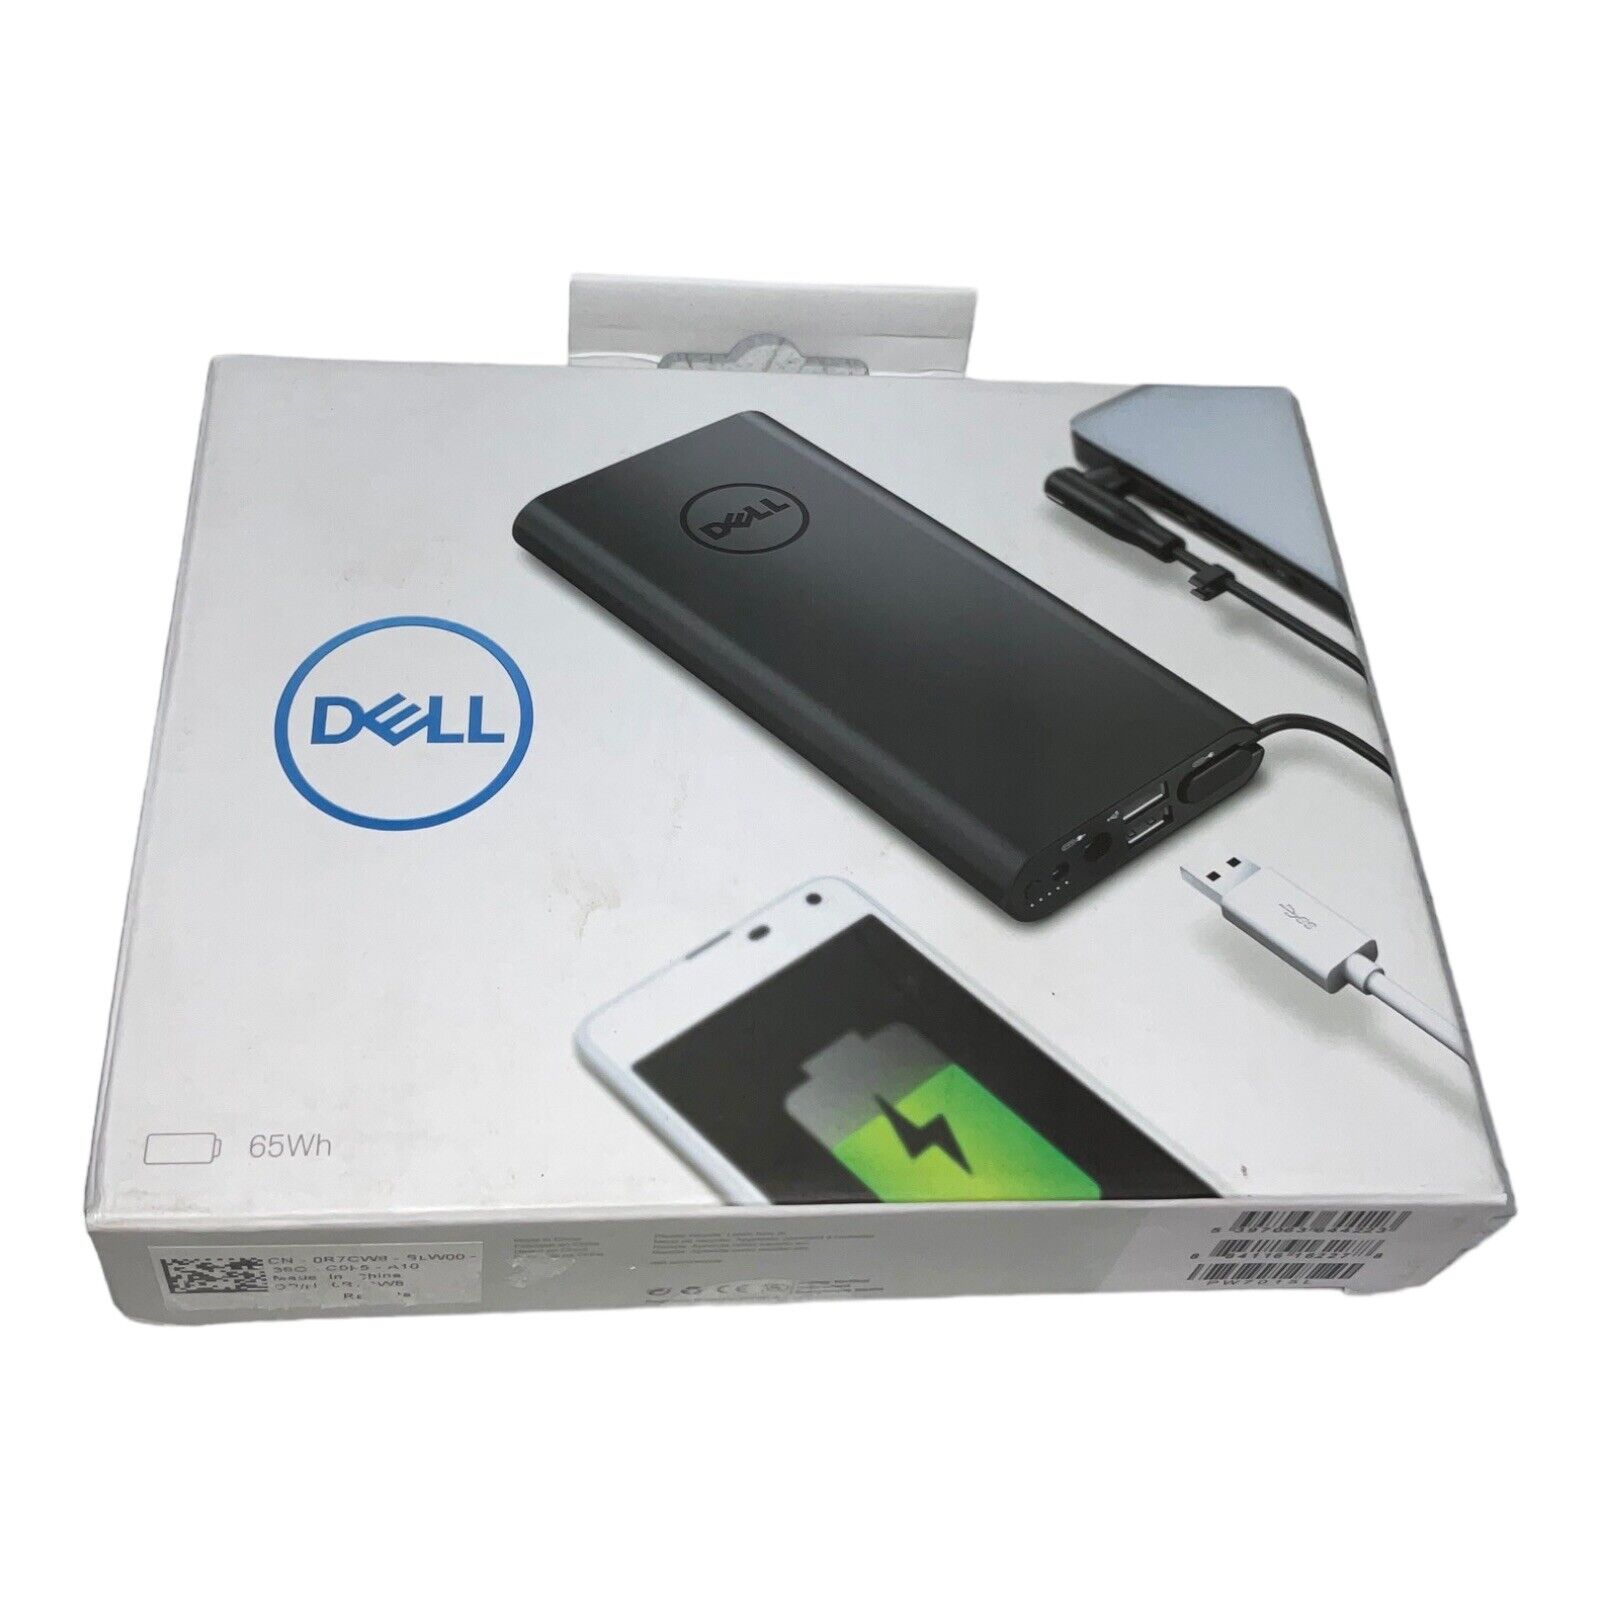 Dell PW7015L 65Wh AC Notebook Power Bank